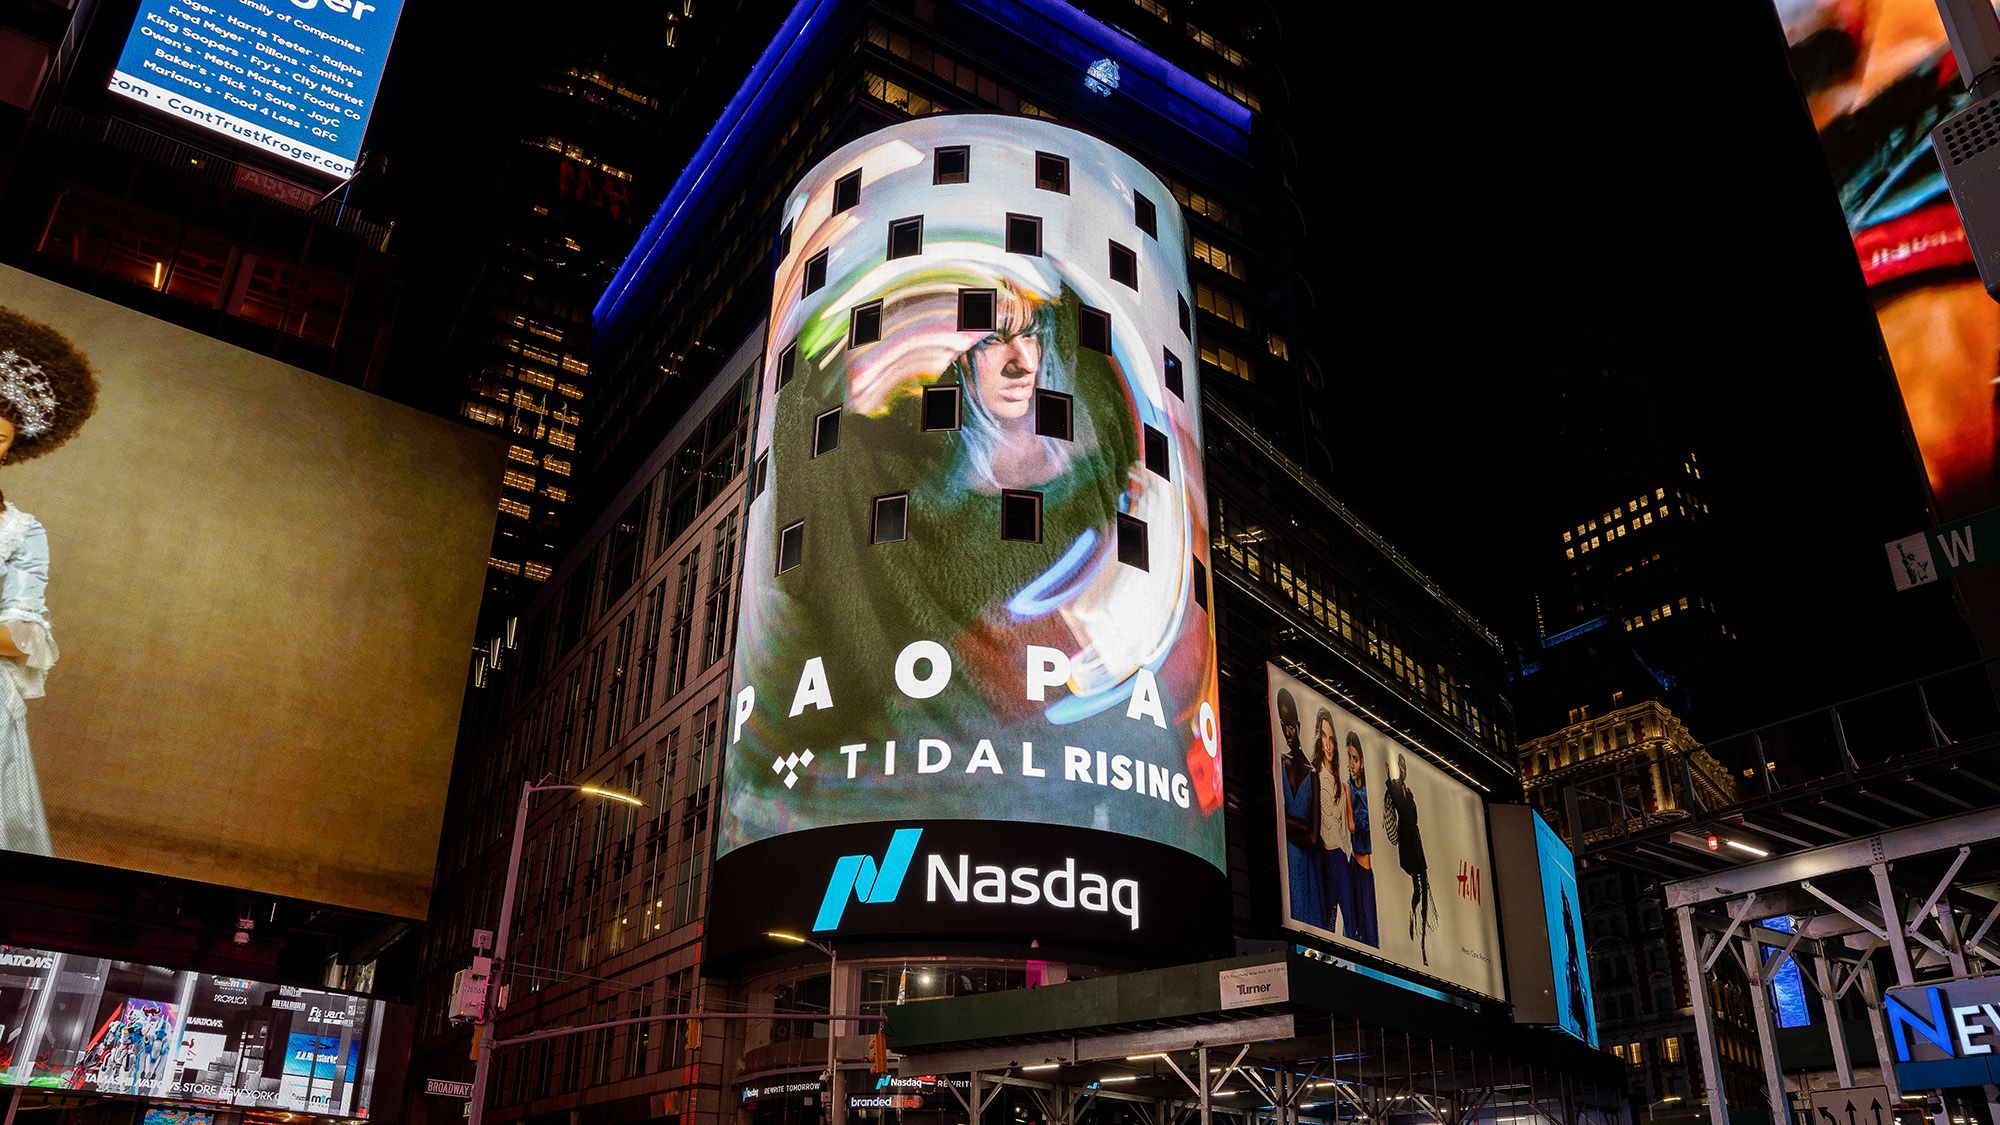 NYC Times Square video billboard showing artist Pao Pao with the text Pao Pao Tidal Rising